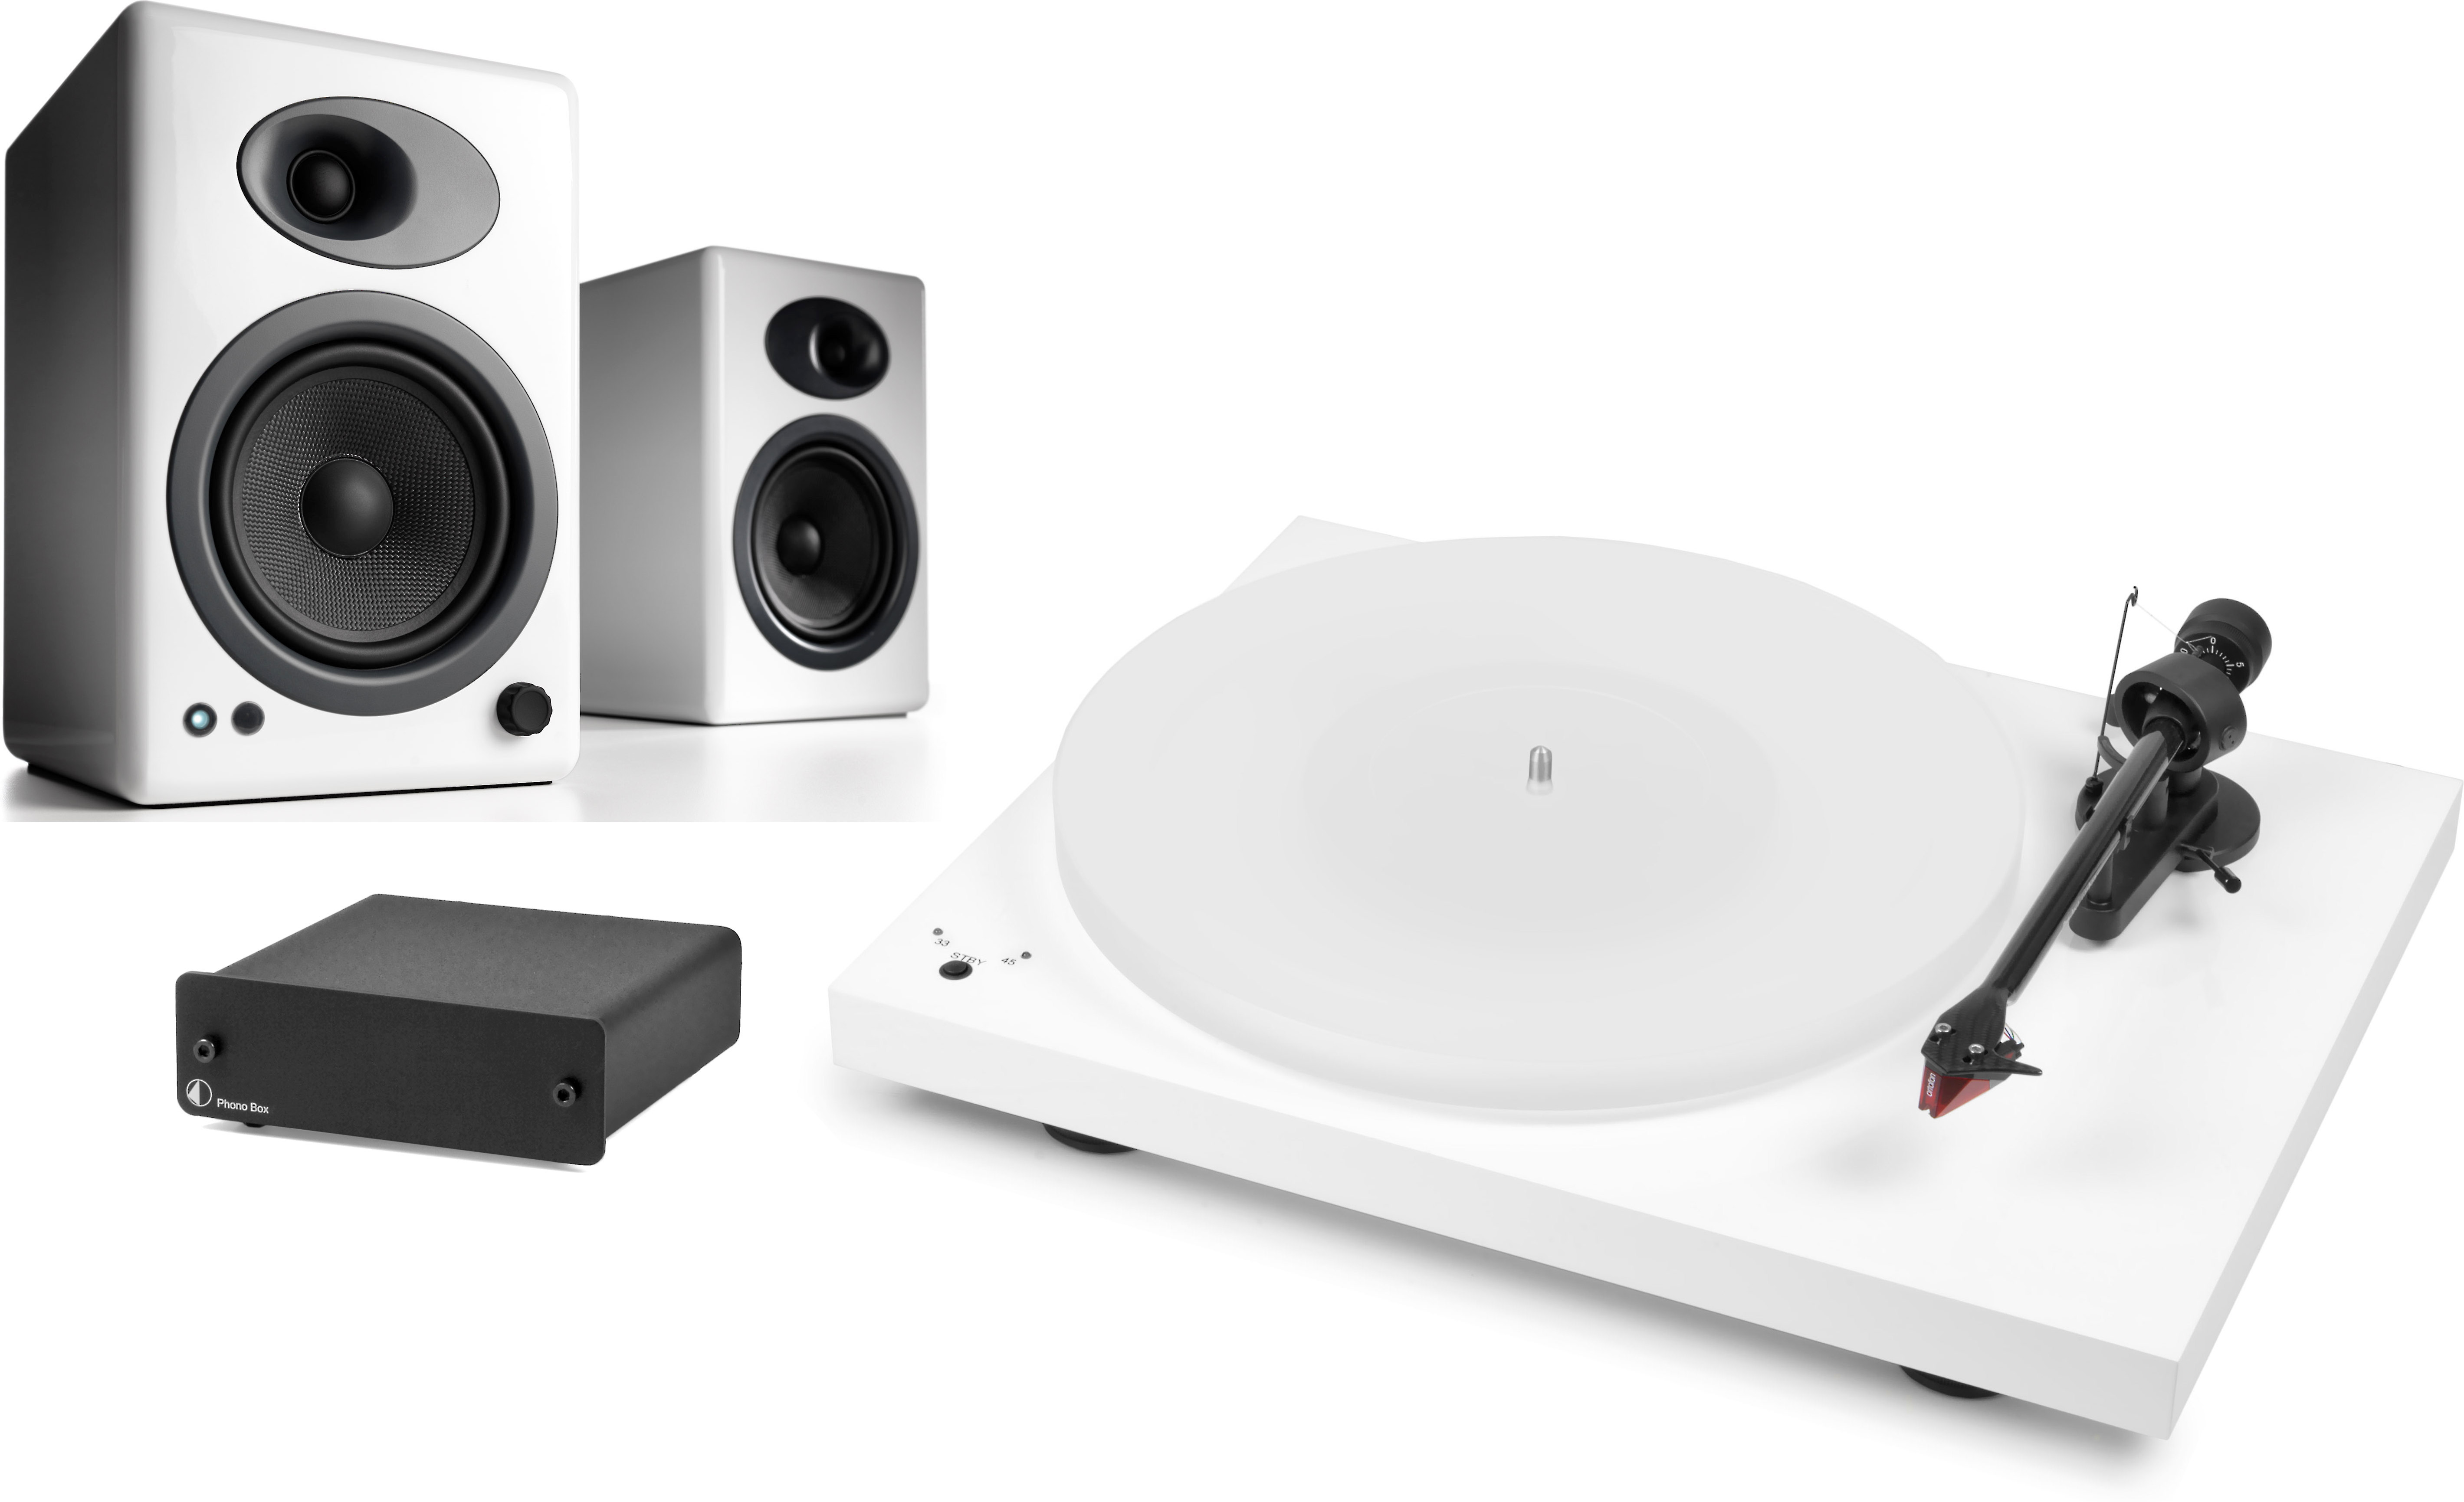 speakers for pro ject turntable